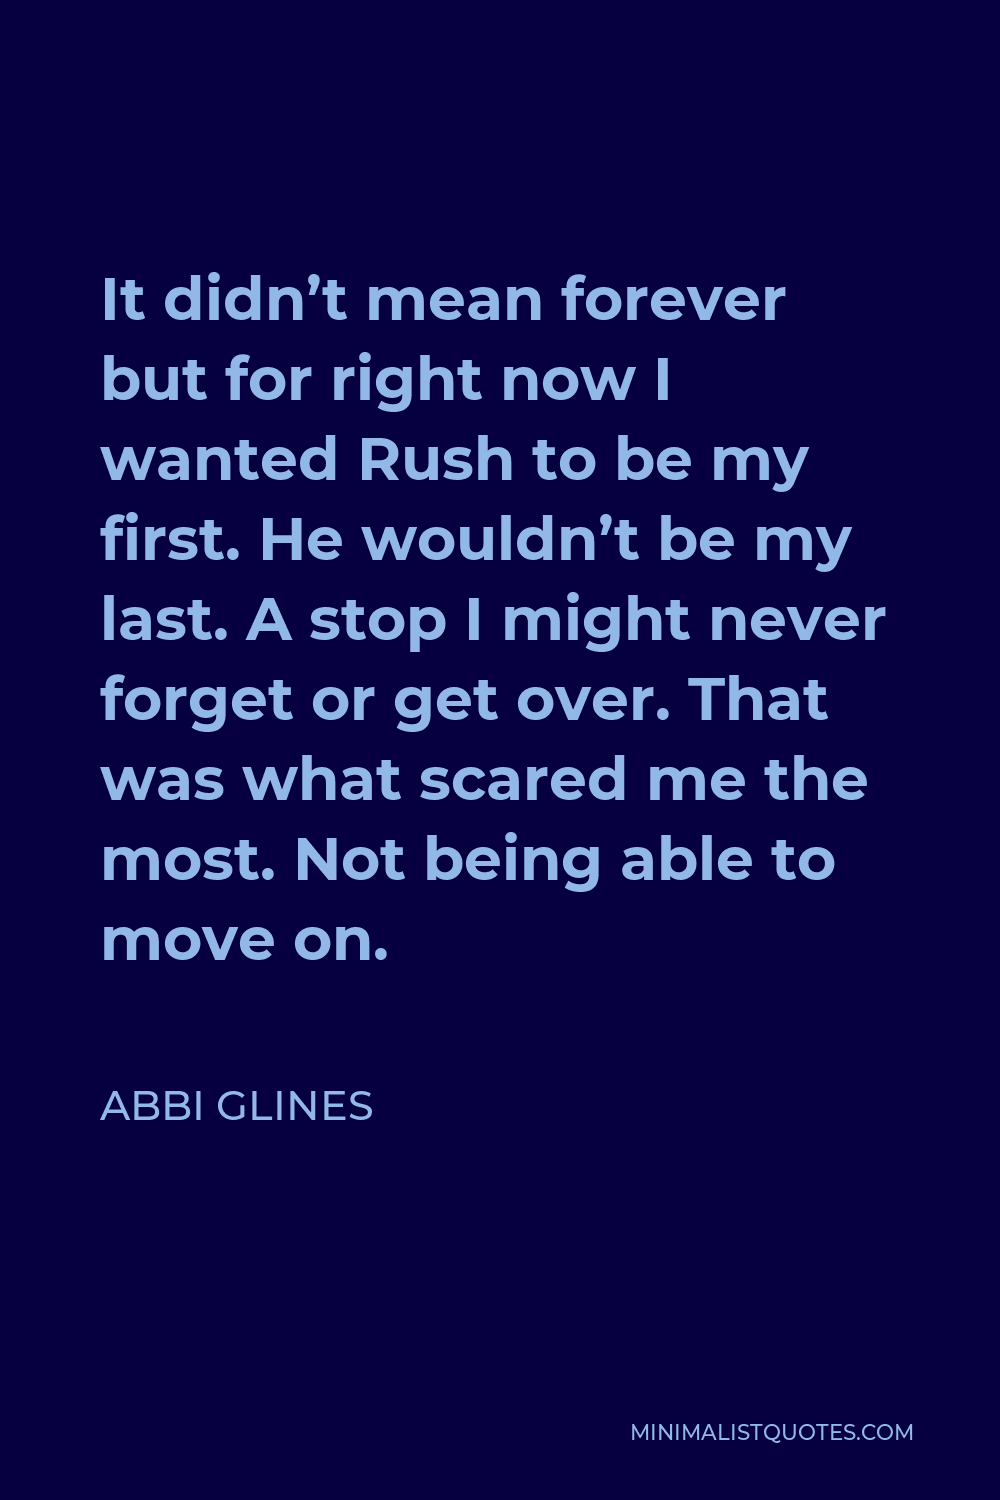 Abbi Glines Quote - It didn’t mean forever but for right now I wanted Rush to be my first. He wouldn’t be my last. A stop I might never forget or get over. That was what scared me the most. Not being able to move on.